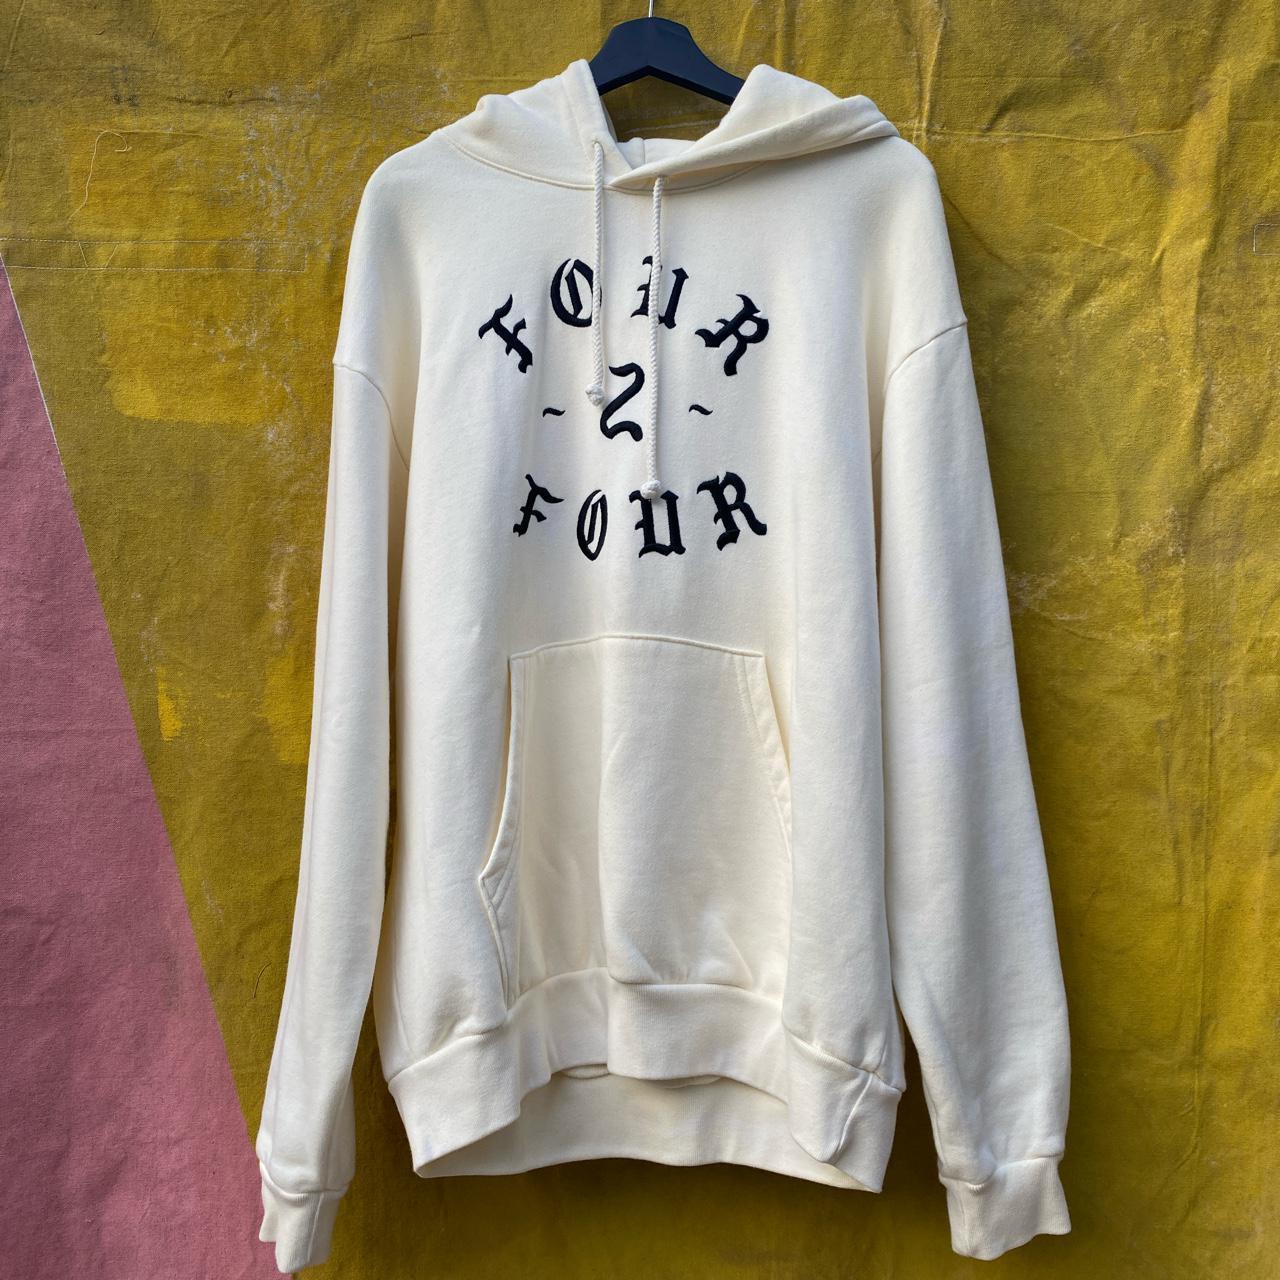 FOURTWOFOUR Men's Cream and Black Hoodie